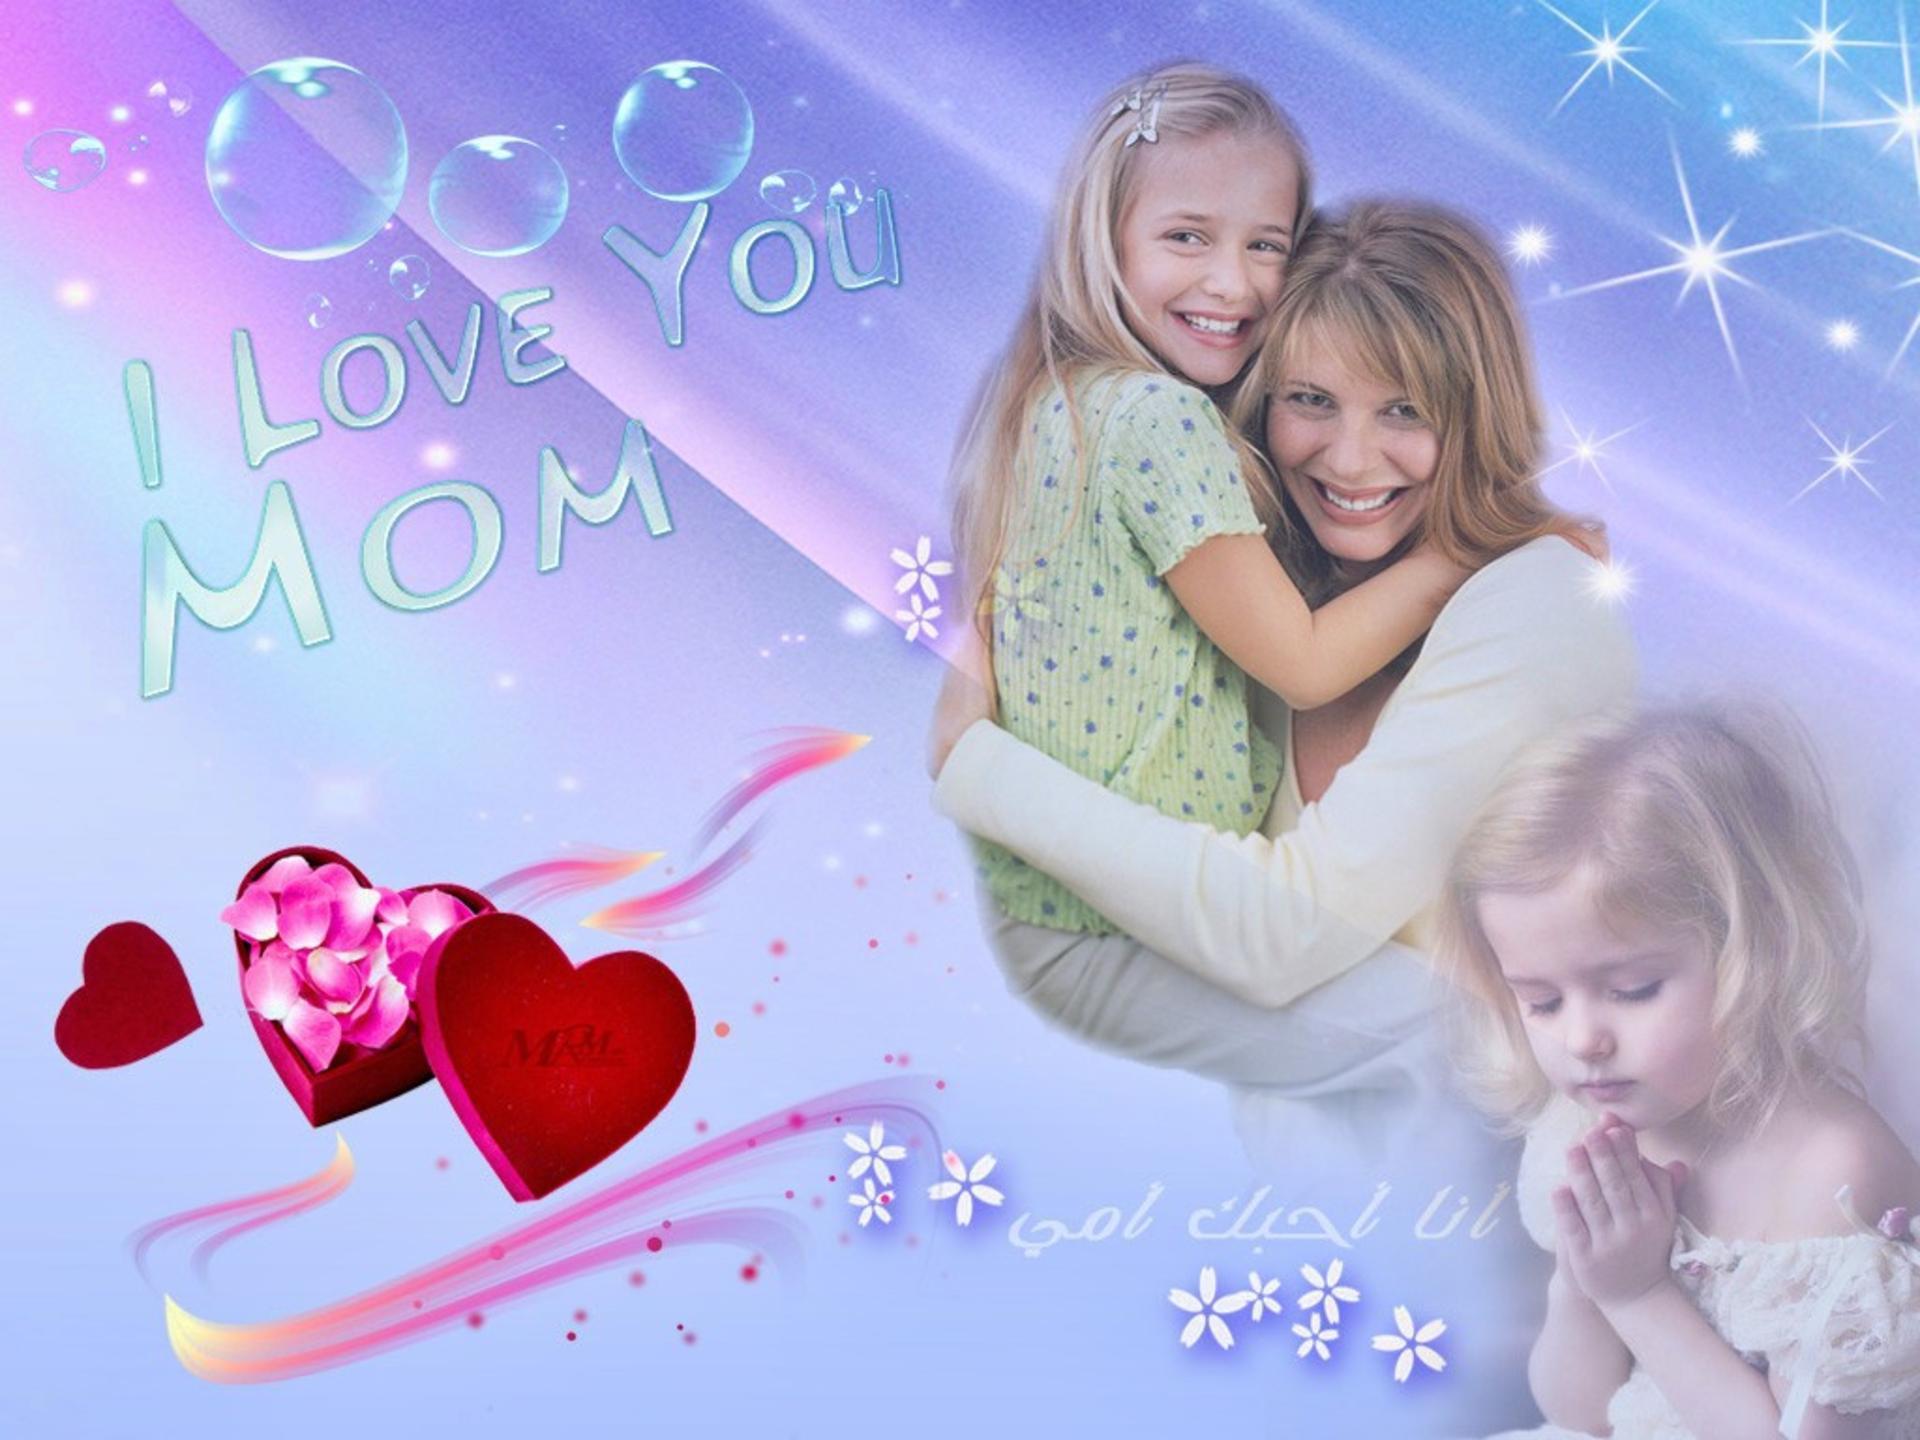 Cute Mother And Baby Greetings I Love You Mom Wallpaper Download